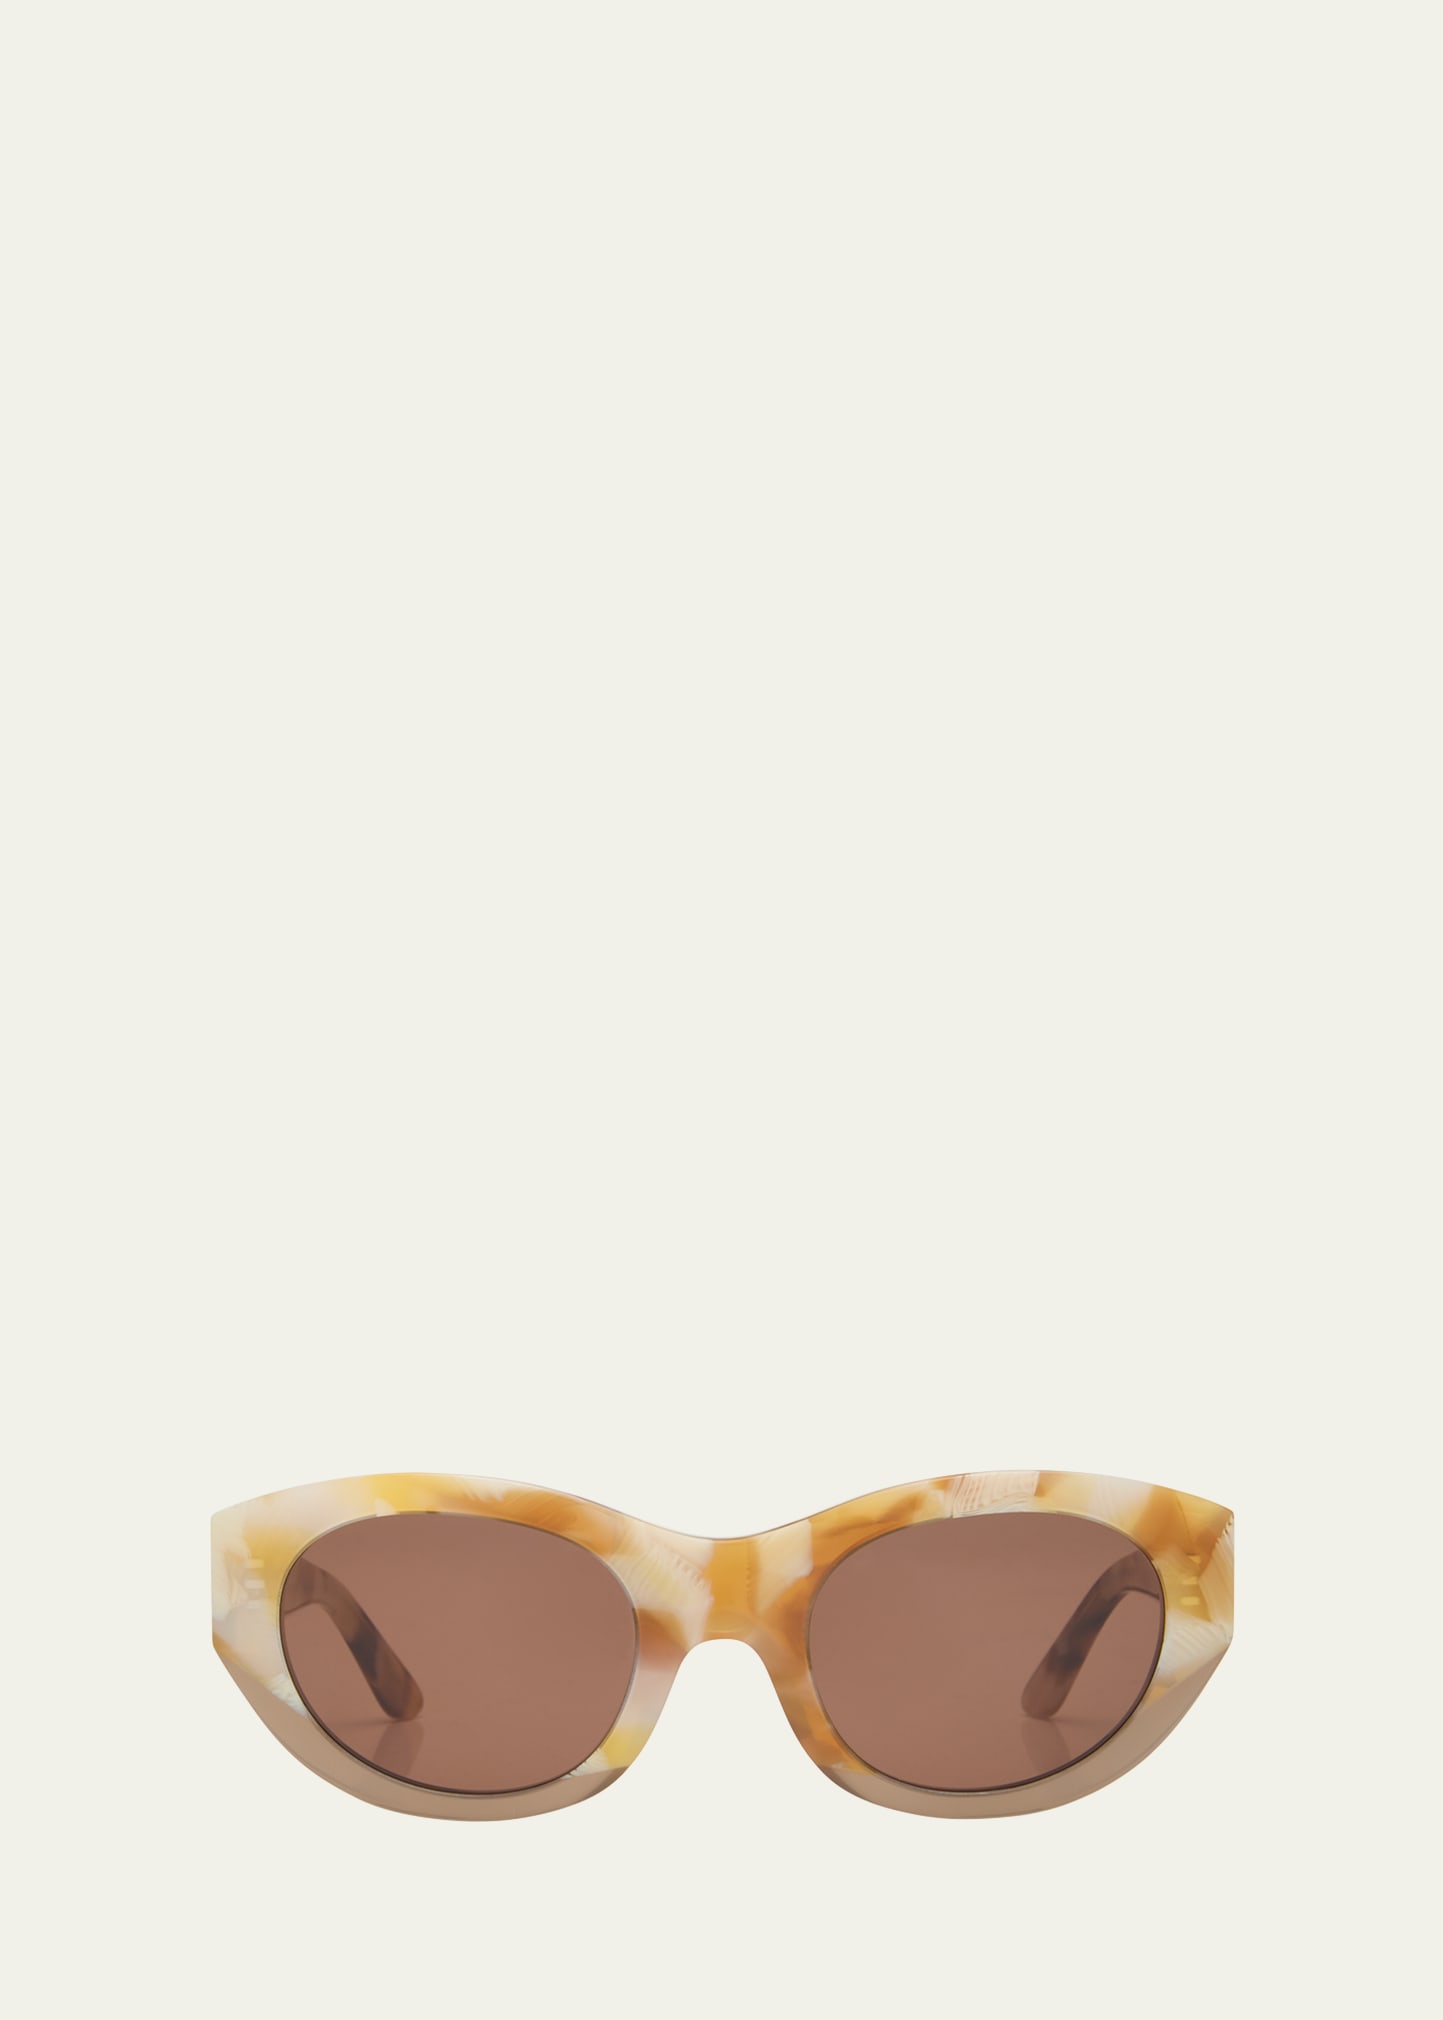 Thierry Lasry Exoty 0811 Acetate Cat-eye Sunglasses In Brown